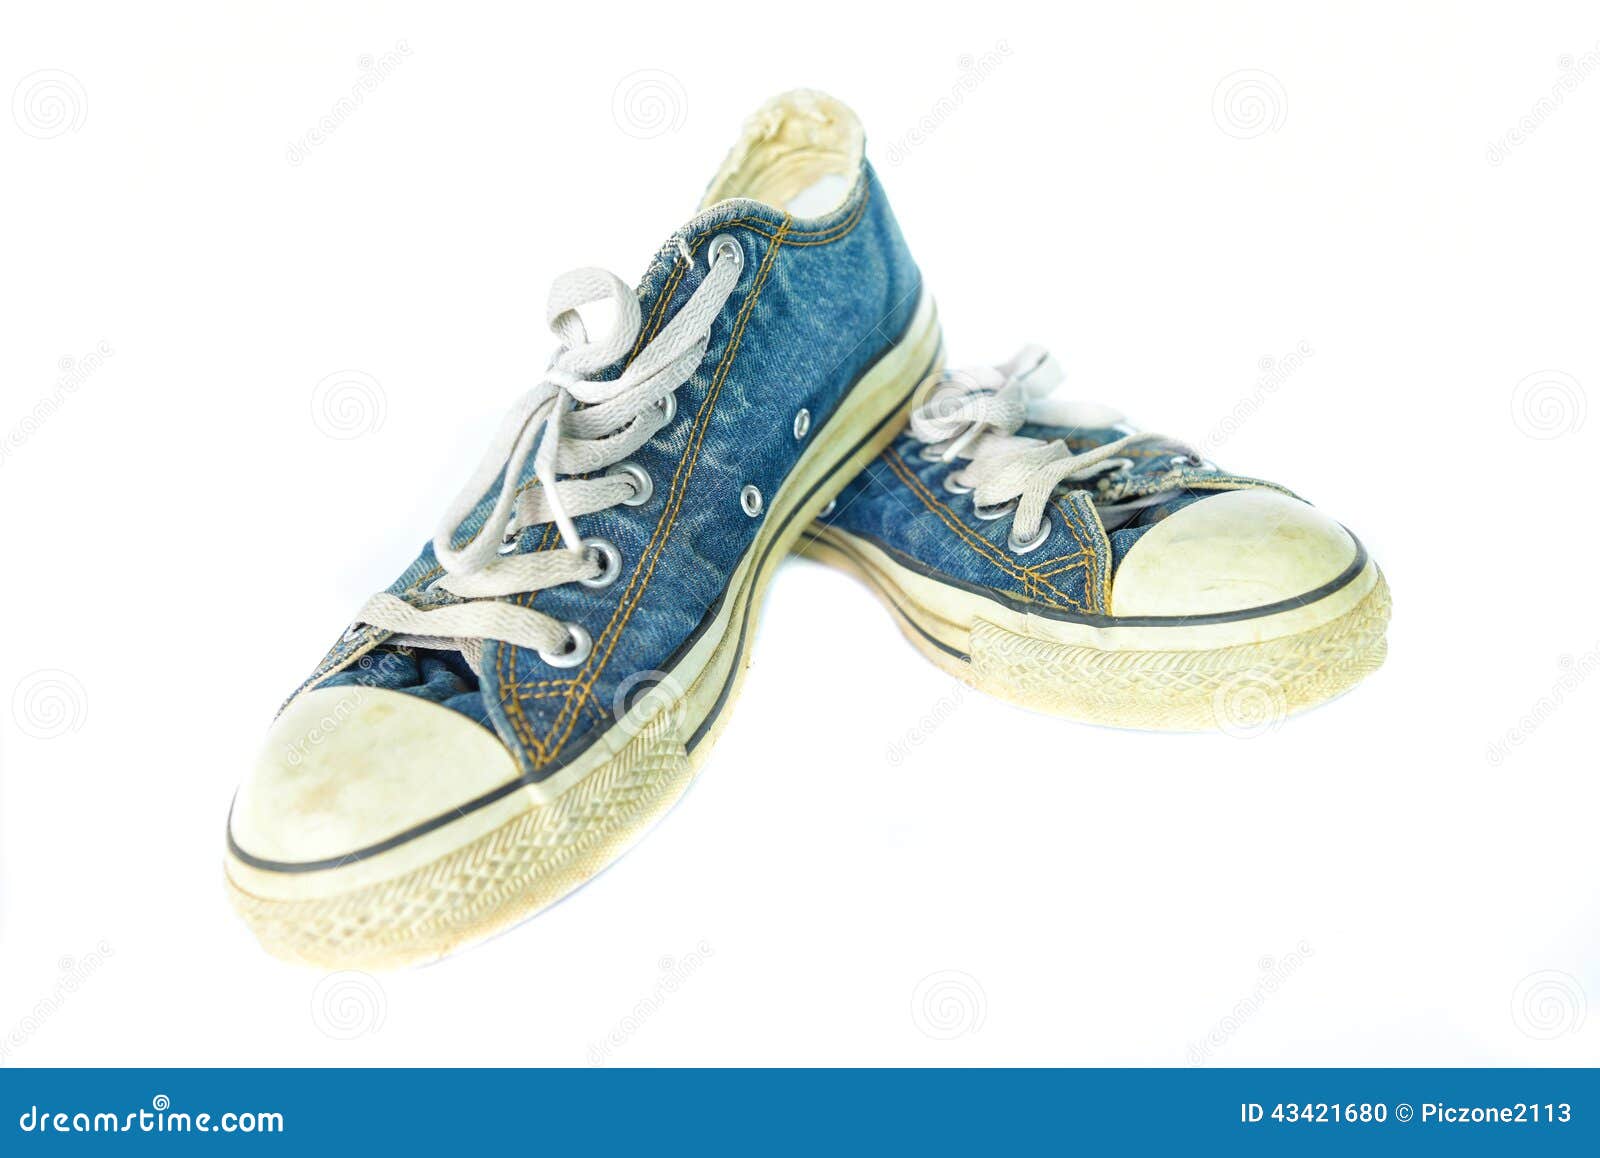 Dirty used blue jean shoes stock photo. Image of white - 43421680